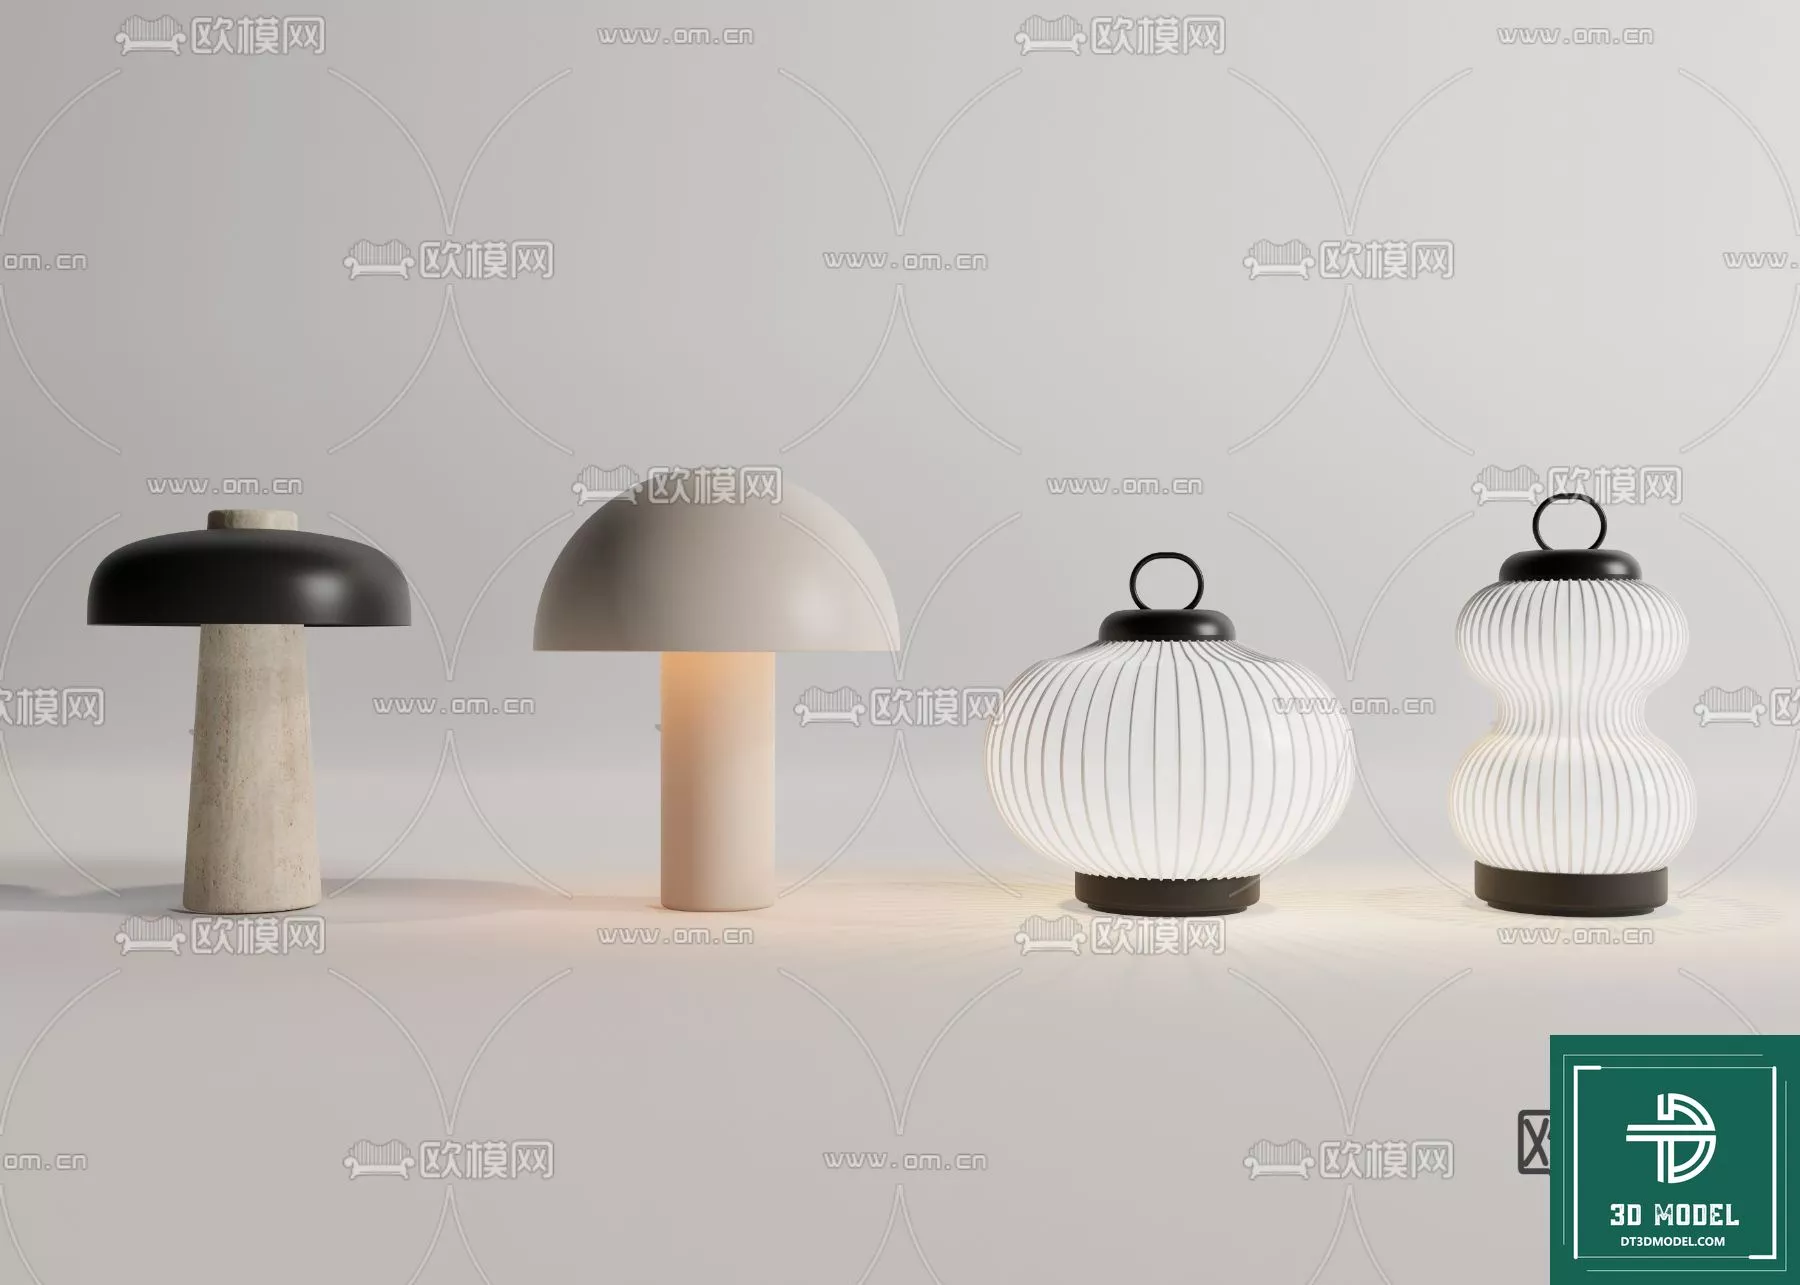 MODERN TABLE LAMP - SKETCHUP 3D MODEL - VRAY OR ENSCAPE - ID14525